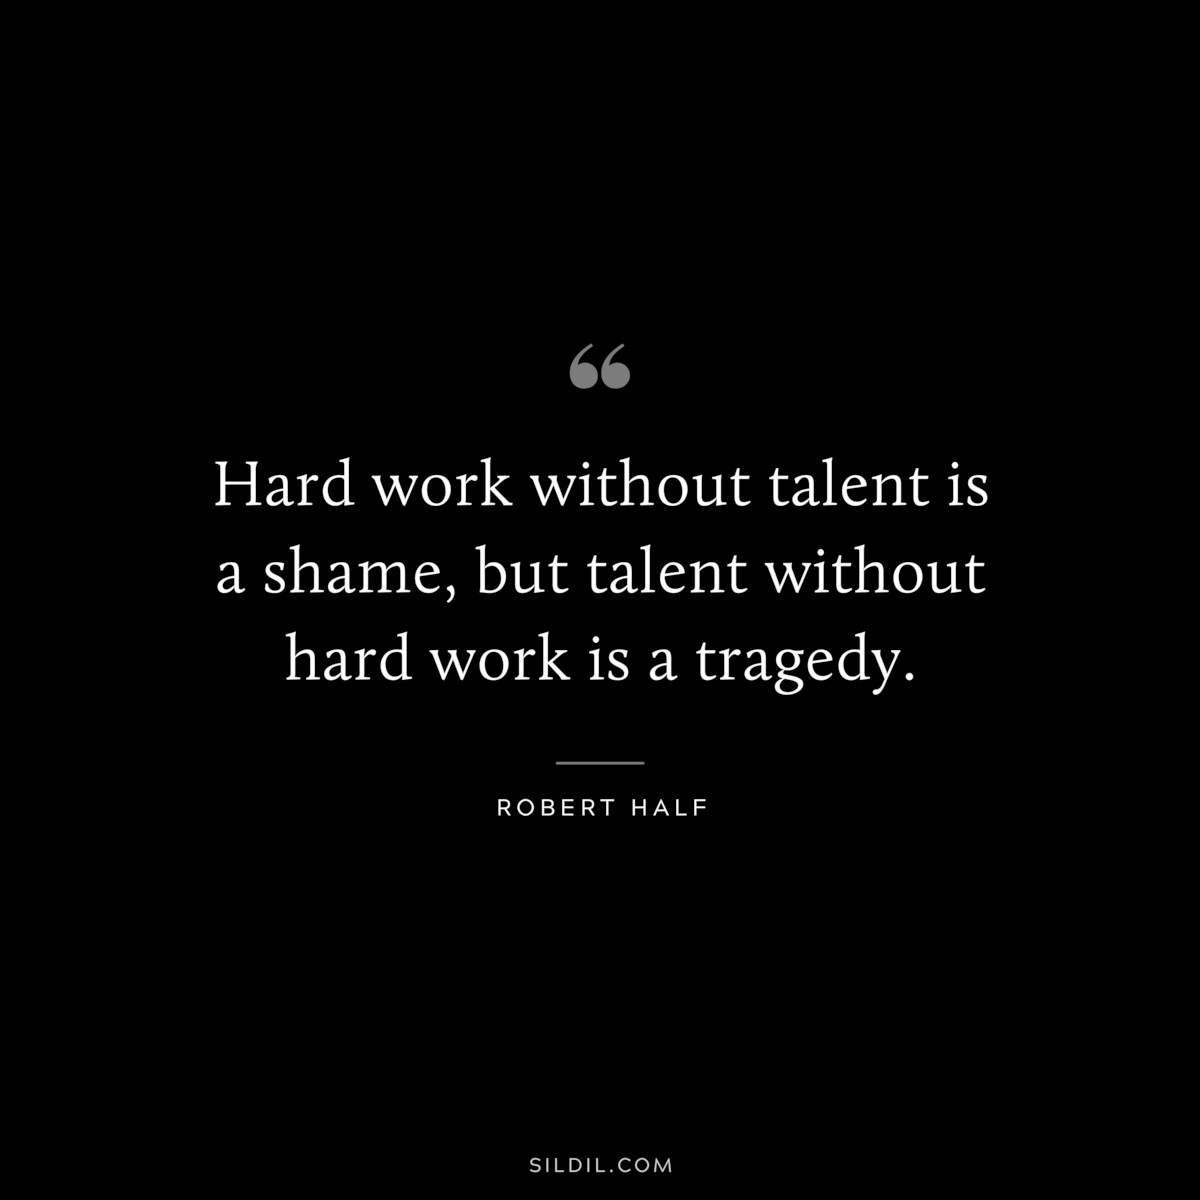 Hard work without talent is a shame, but talent without hard work is a tragedy. ― Robert Half